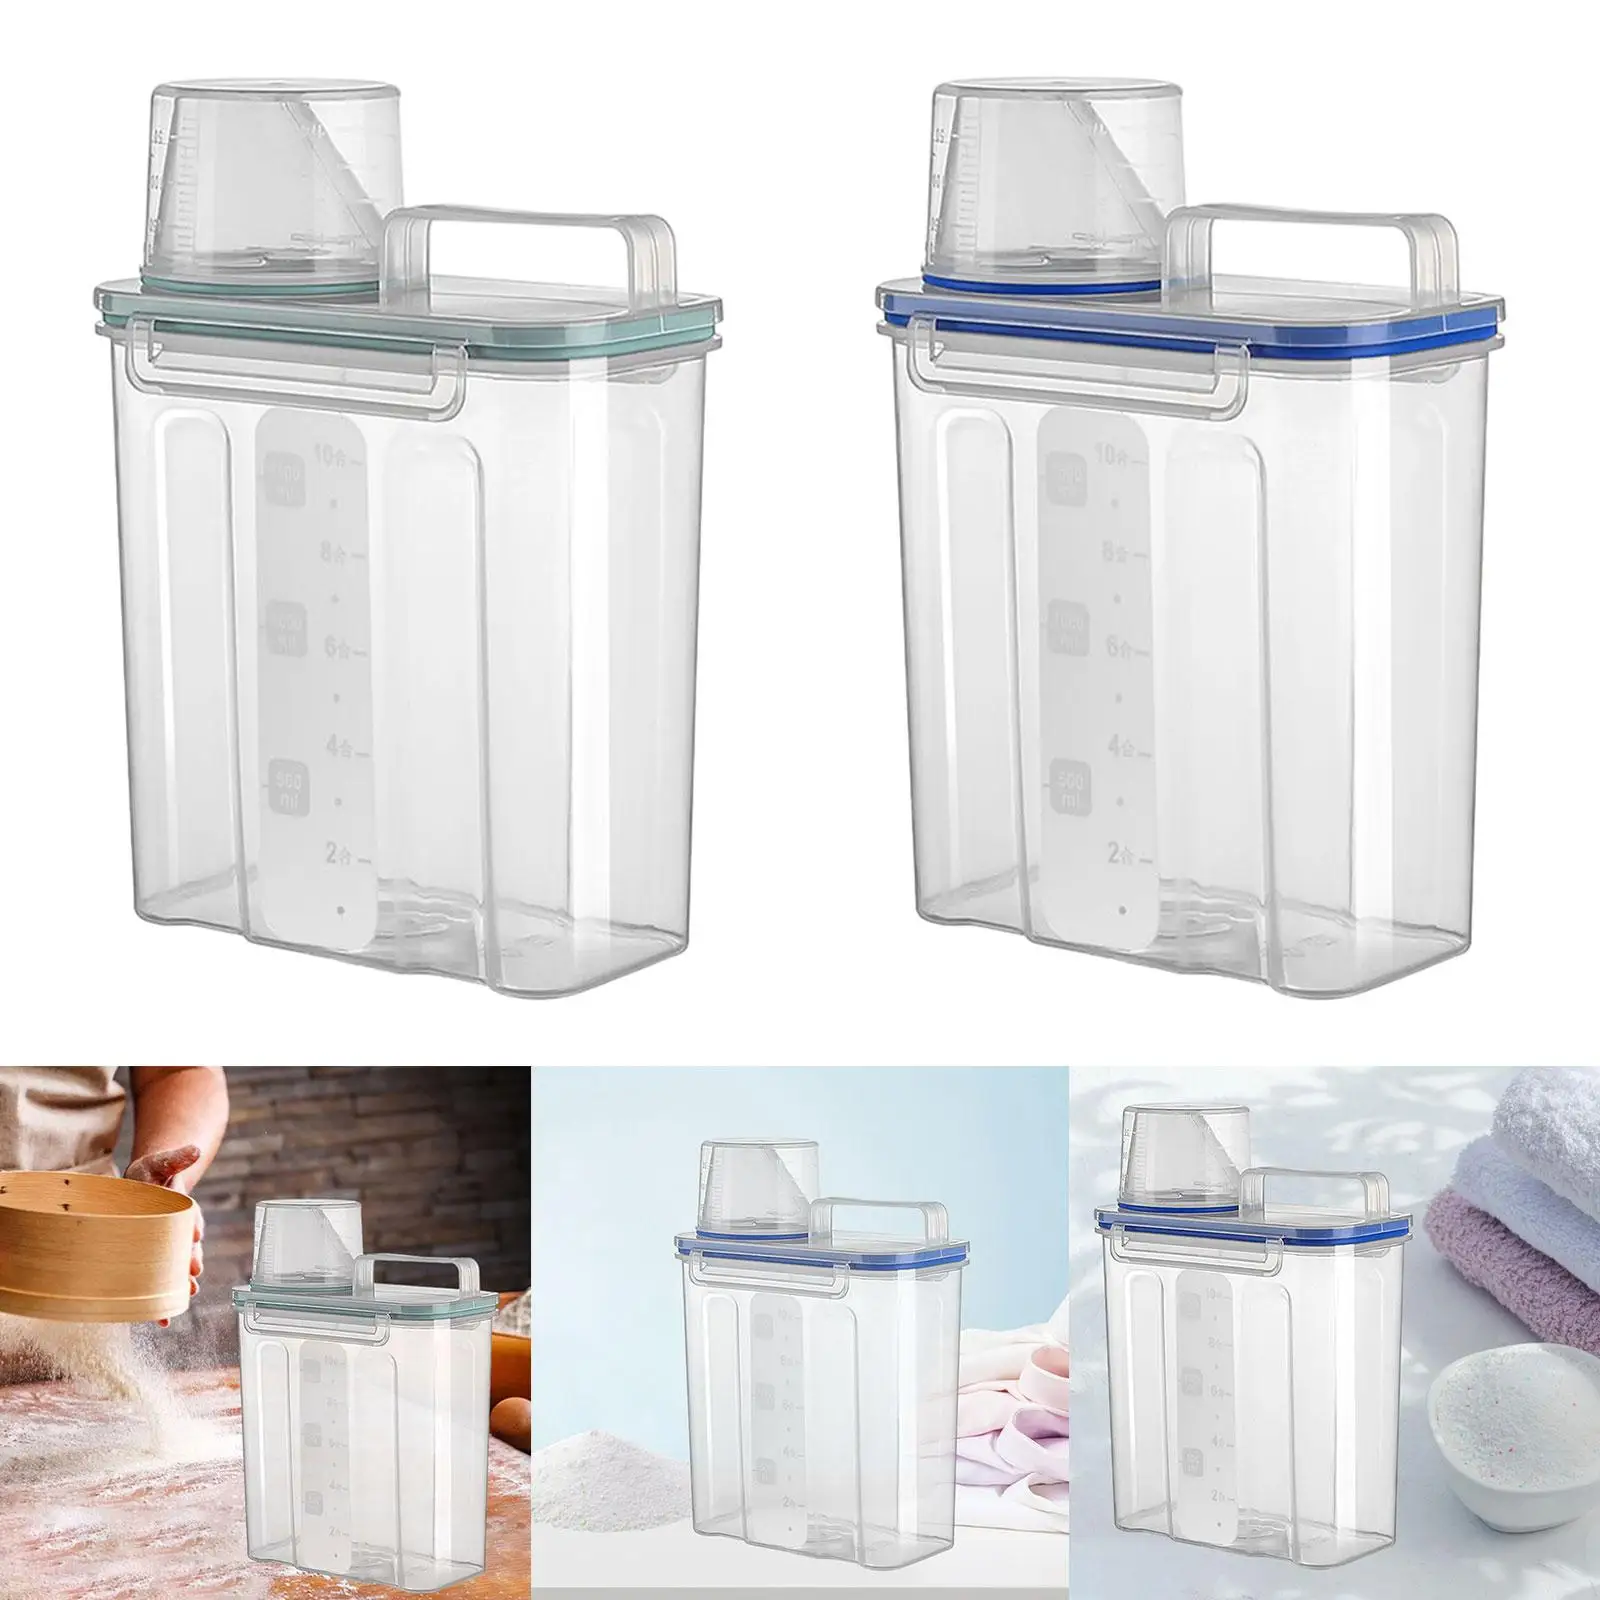 Laundry Powder Dispenser 1.5L Multifunctional Liquid Soap Dispenser with Lid for Laundry Room Food Kitchen Bathroom